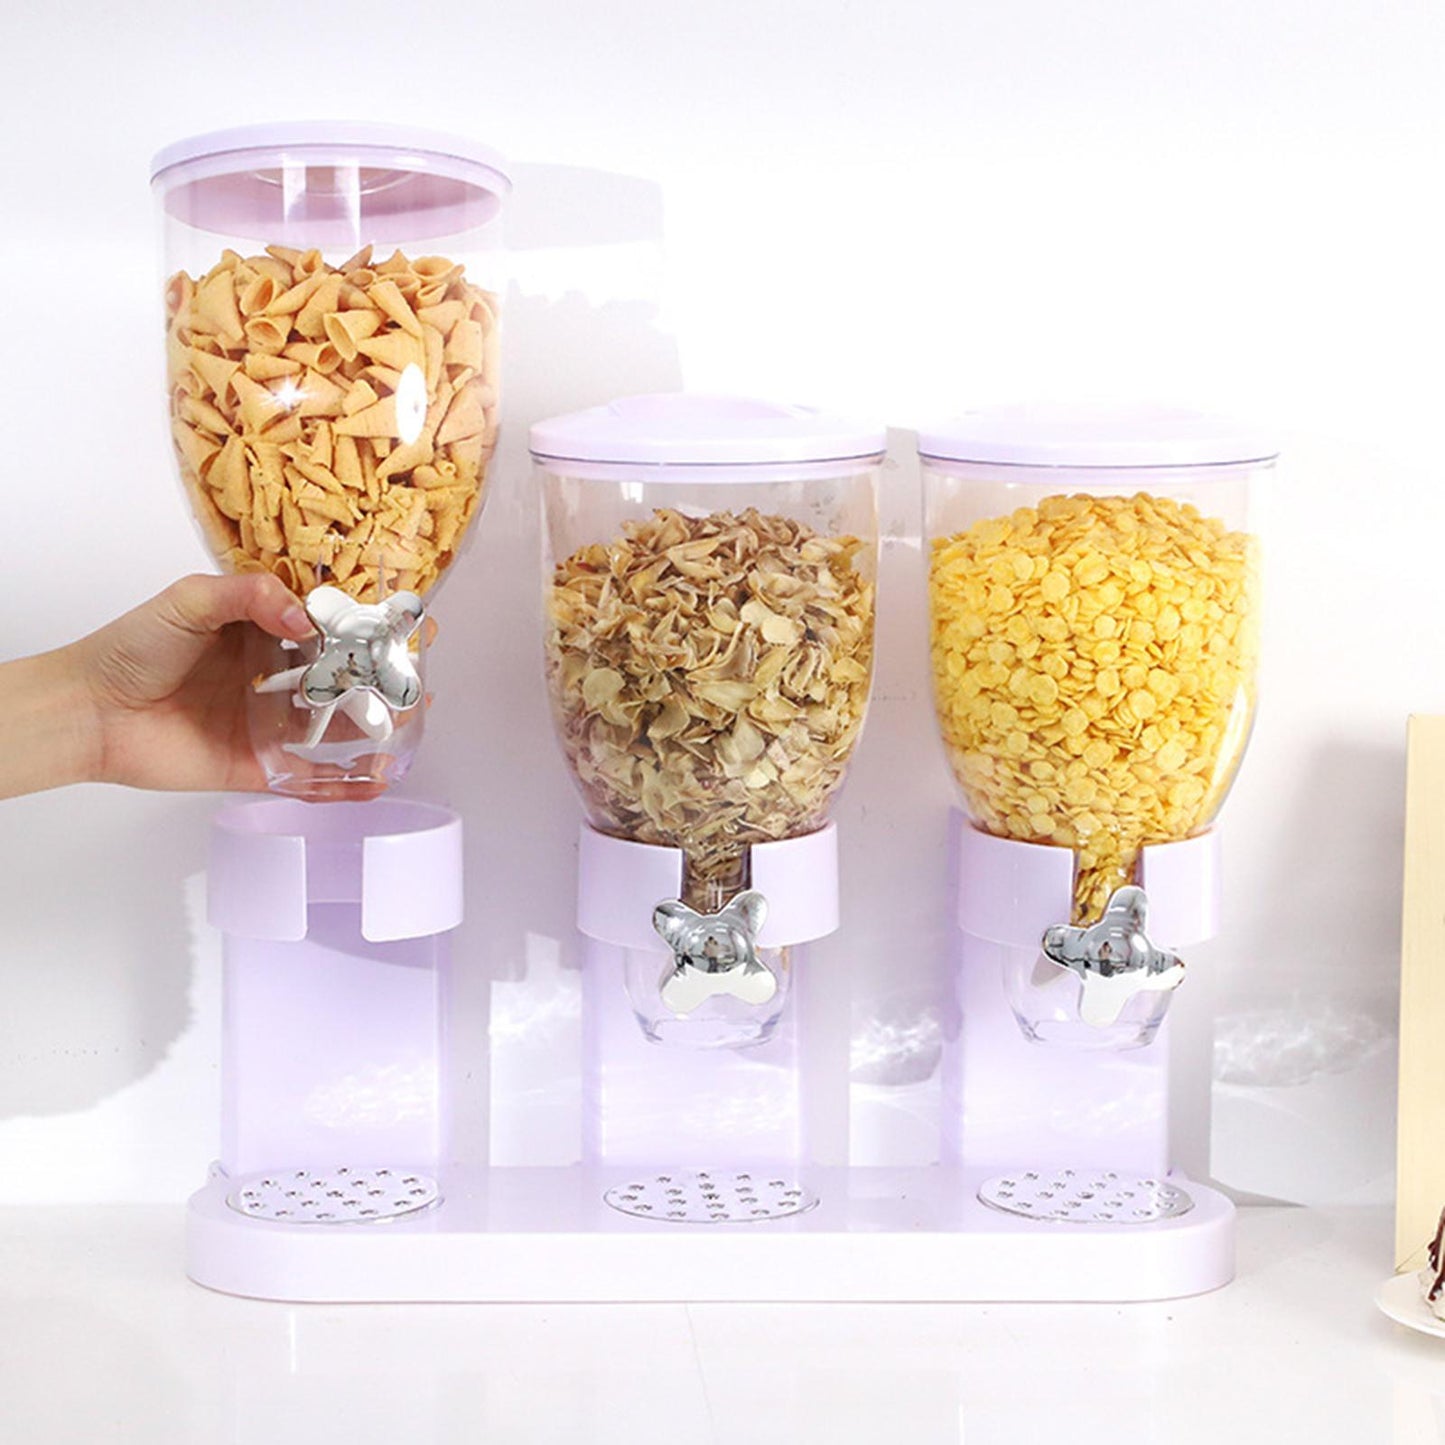 Cereal Dispenser Countertop Single, Triple Dispenser for Dry Food Oatmeal, Granola, Rice with Large Capacity